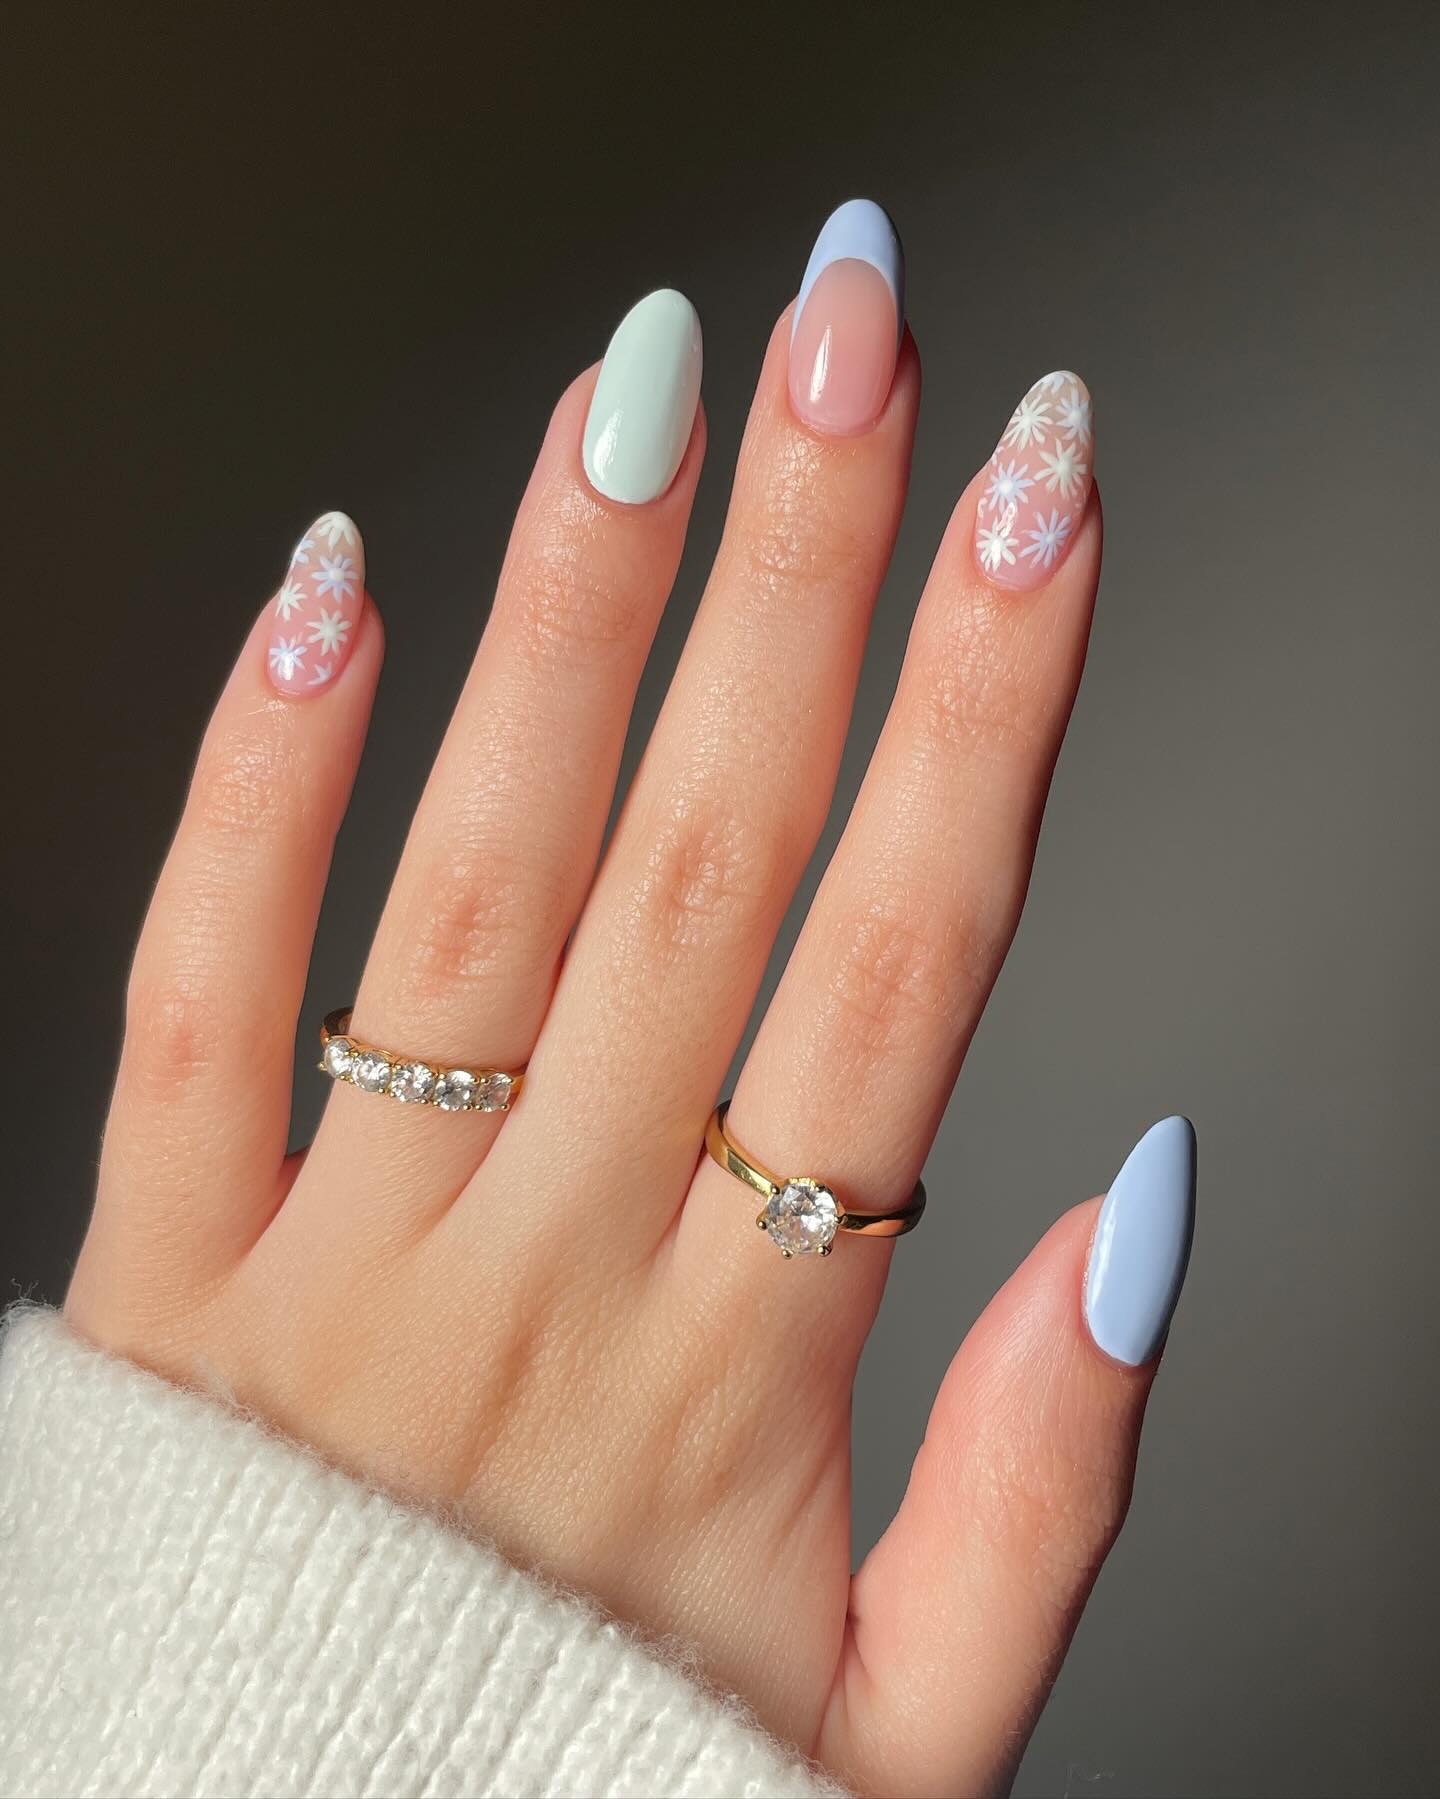 100 Pretty Spring Nail Designs To Try This Year images 89